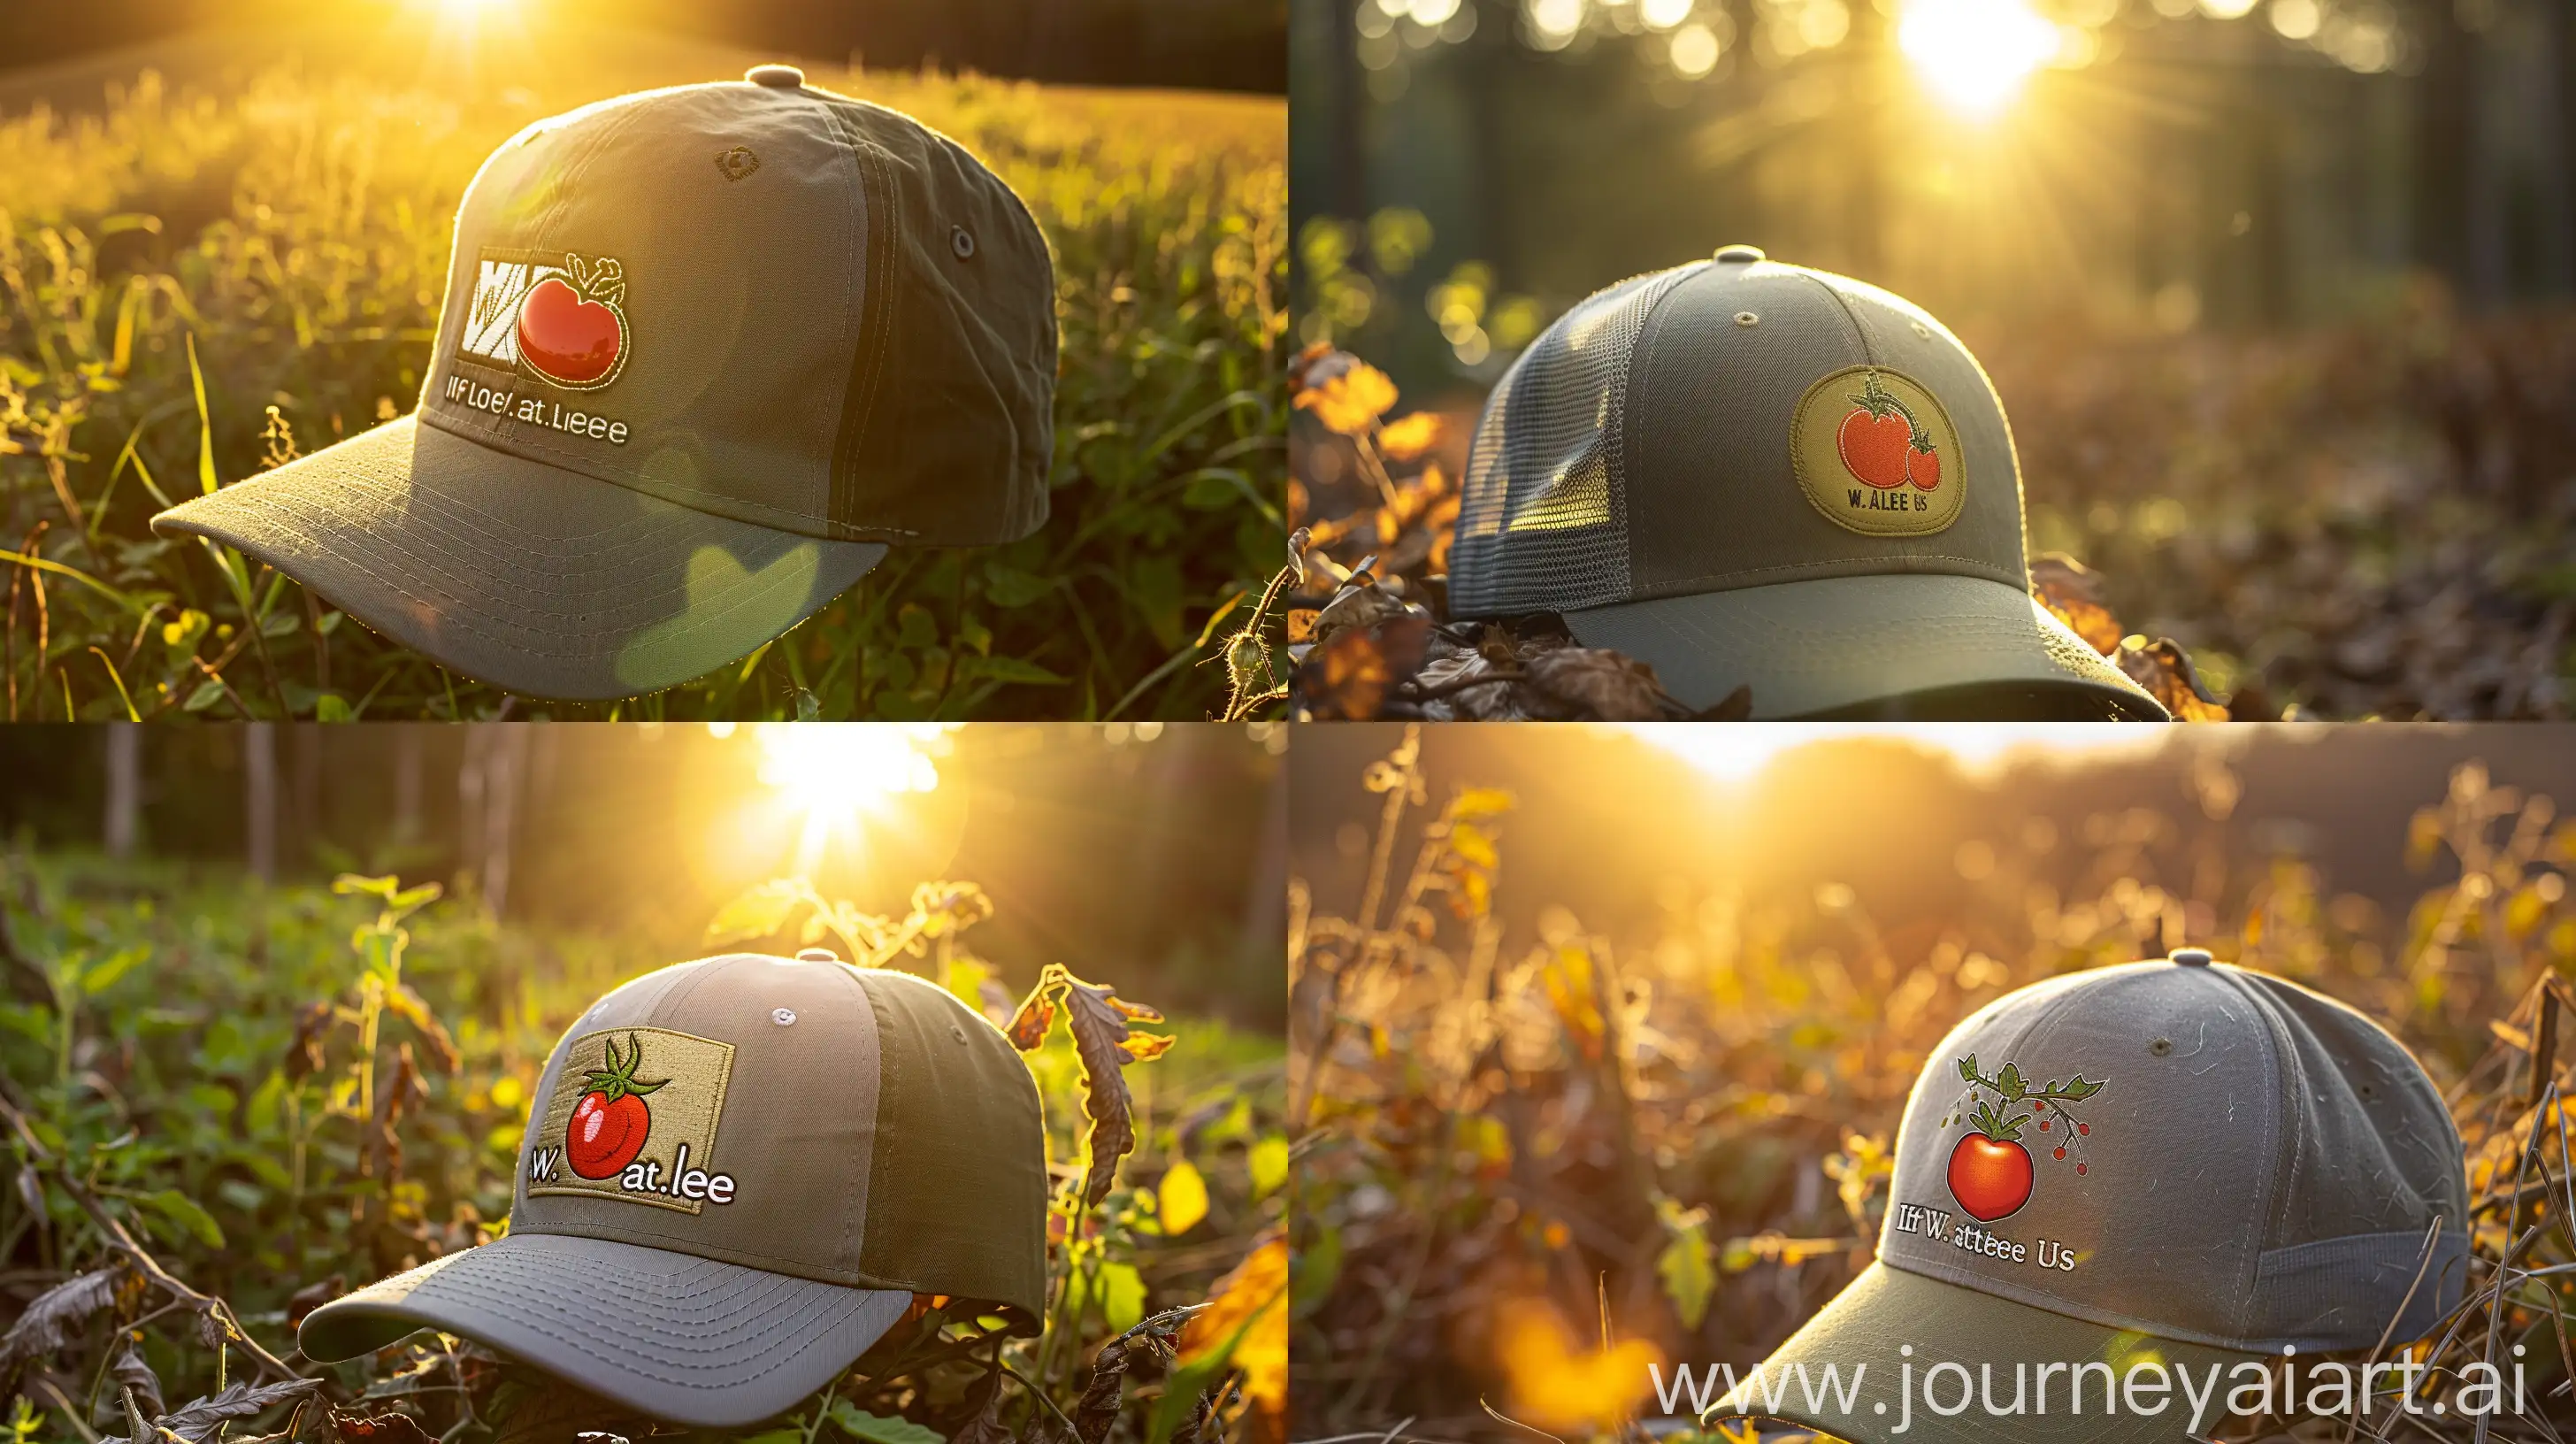 High detailed photo capturing a Vintage Trucker Hat - Olive. The sun, casting a warm, golden glow, bathes the scene in a serene ambiance, illuminating the intricate details of each element. The composition centers on a Vintage Trucker Hat - Olive. If you love us, where your heart on your hat! The 100% cotton tricolor trucker-style design in gray, birch and olive features a vintage-inspired W. Atlee us patch decorated with a plump red tomato. A plastic snap back closure ensures a comfy fit f. The image evokes a sense of tranquility and natural beauty, inviting viewers to immerse themselves in the splendor of the landscape. --ar 16:9 